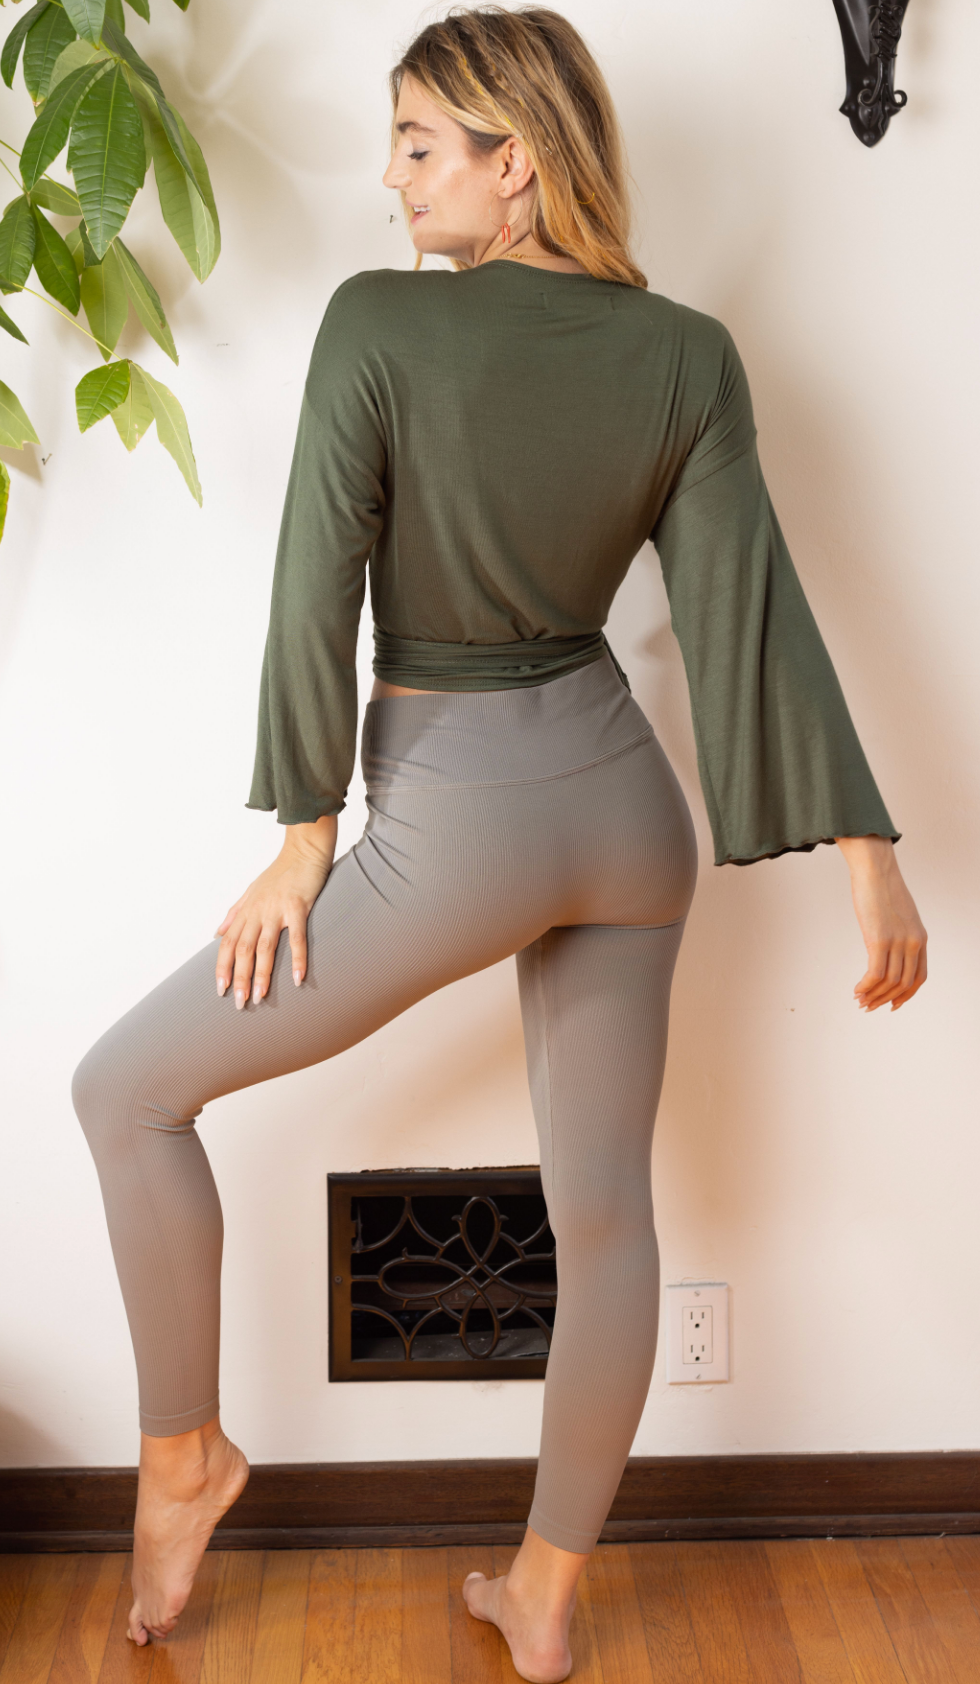 Prana Knit Wrap Top - Yoga Clothing by Daughters of Culture